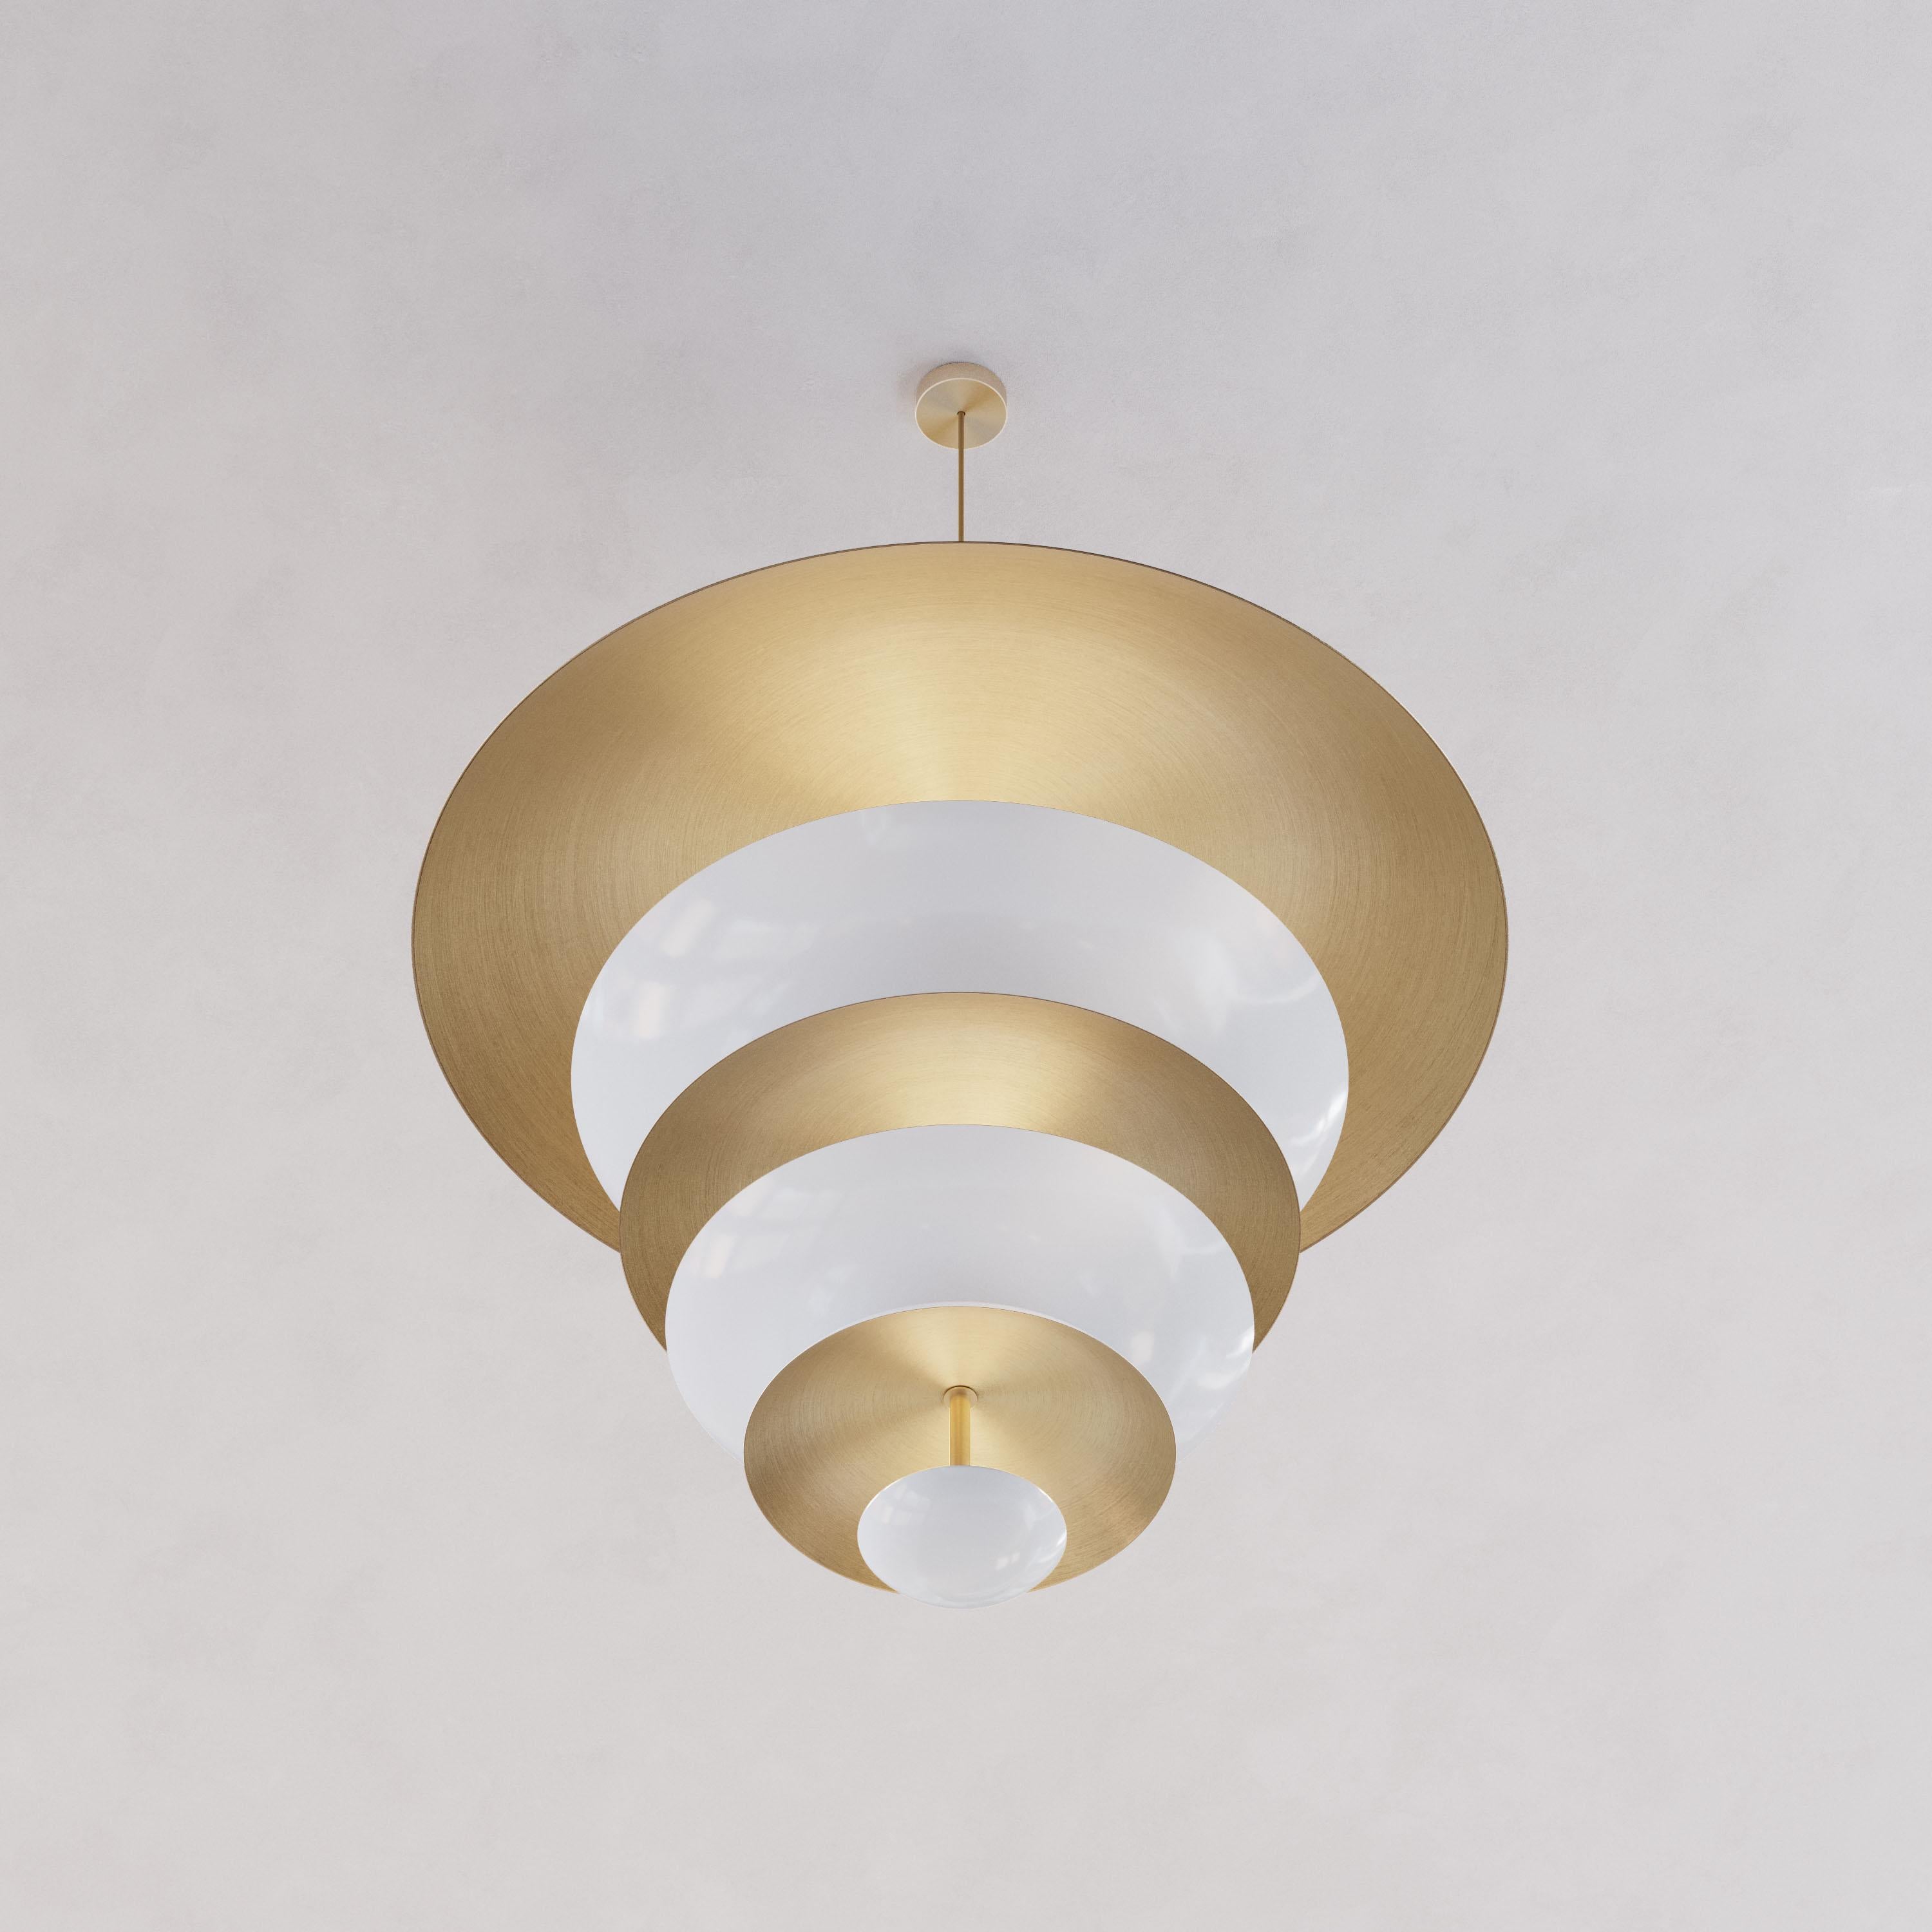 'Cosmic Purion' Chandelier XL 100, White Lacquered Brass Pendant, Ceiling Lamp In New Condition For Sale In London, GB